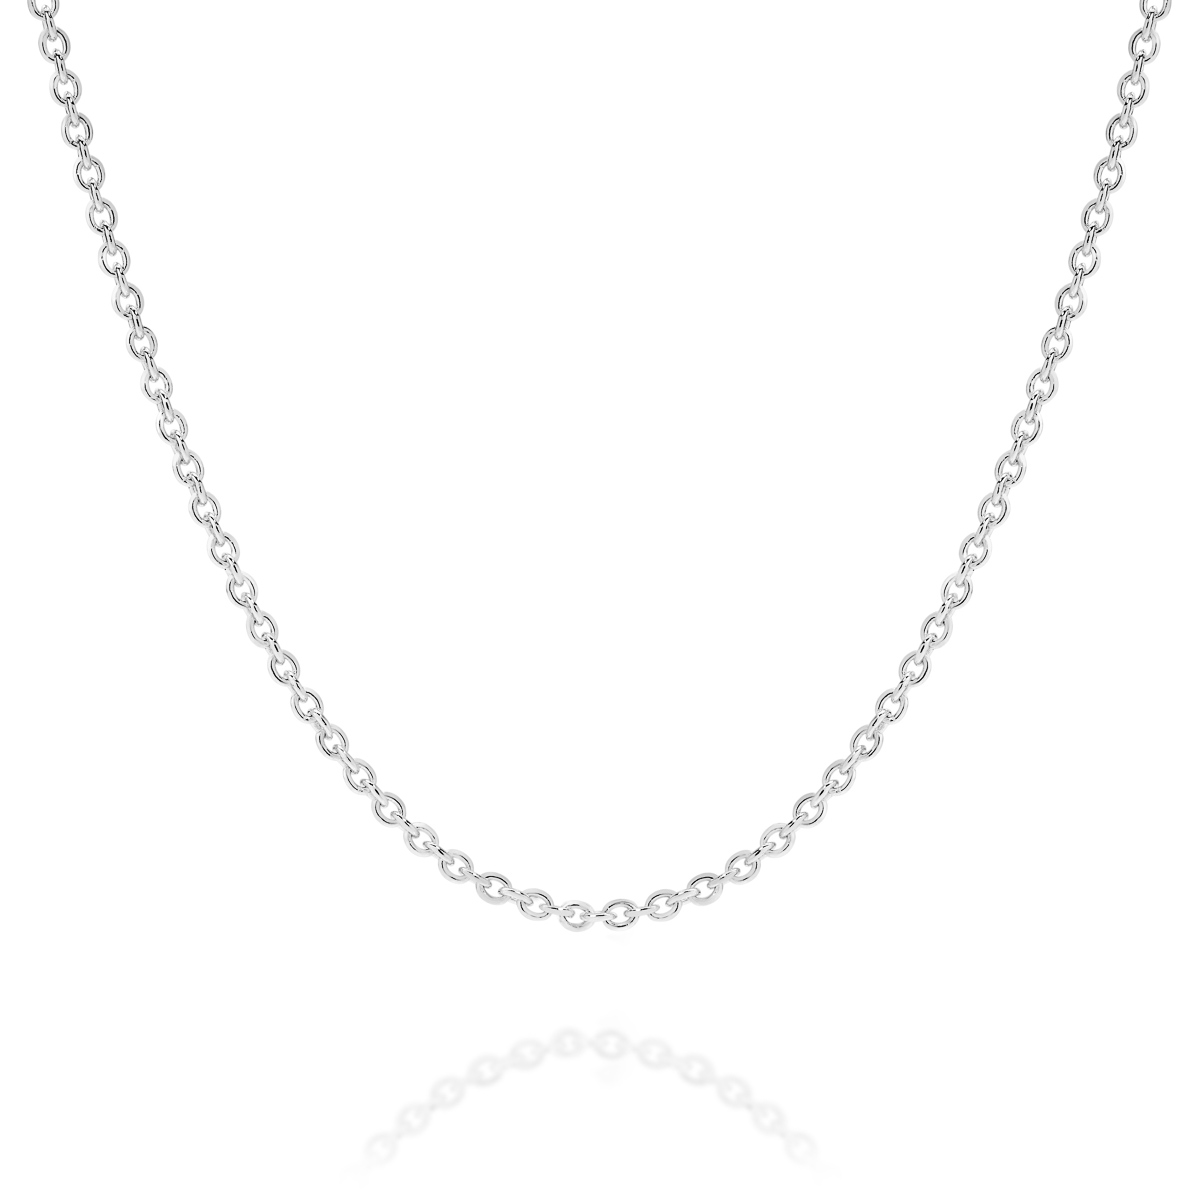 18K White Gold Oval Link Polished Finish Chain - Petite